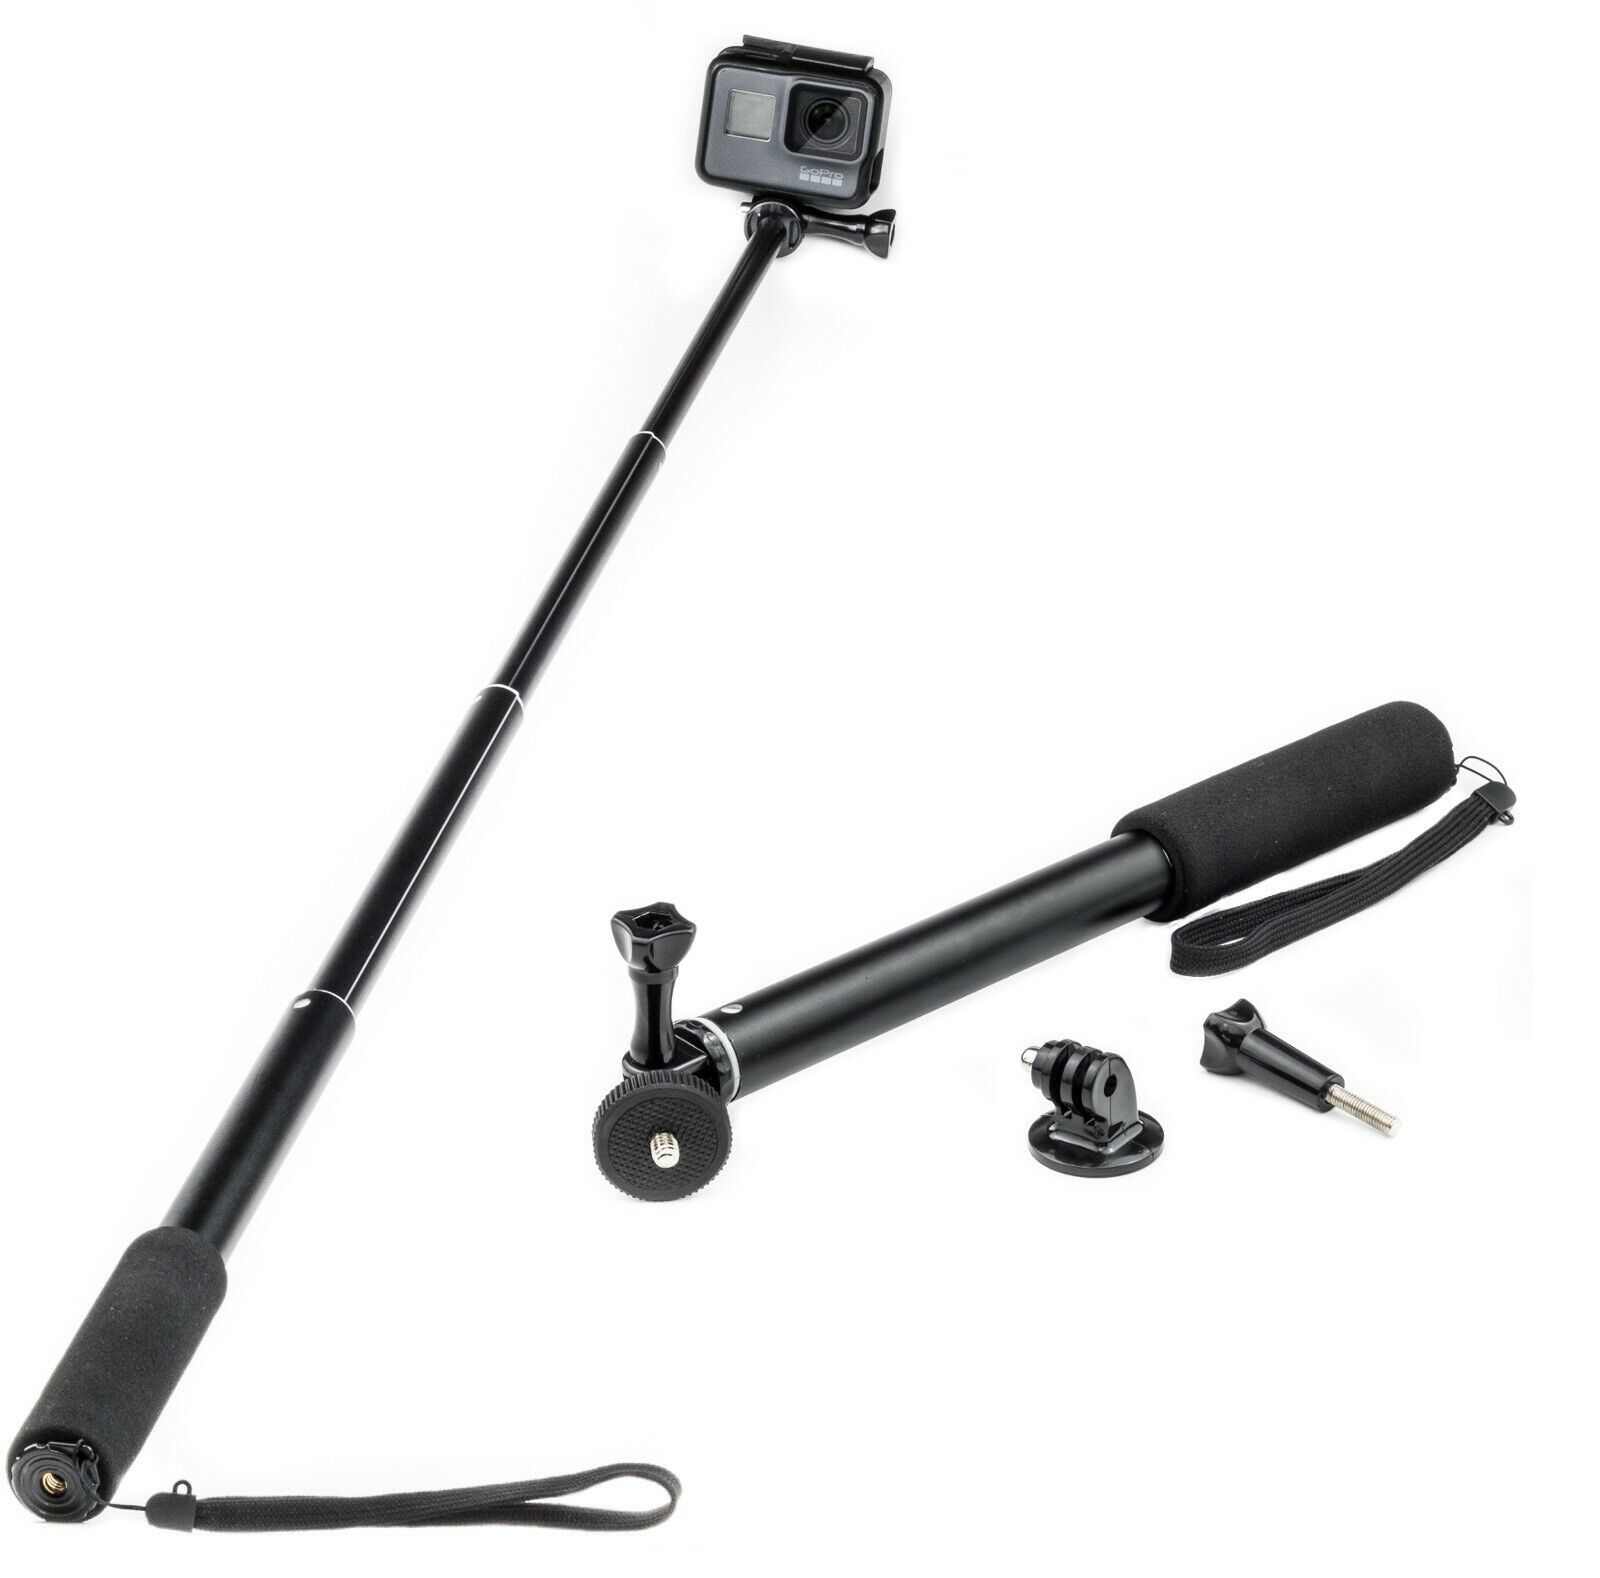 Mastering Selfie Stick Techniques With The Apeman Monopod